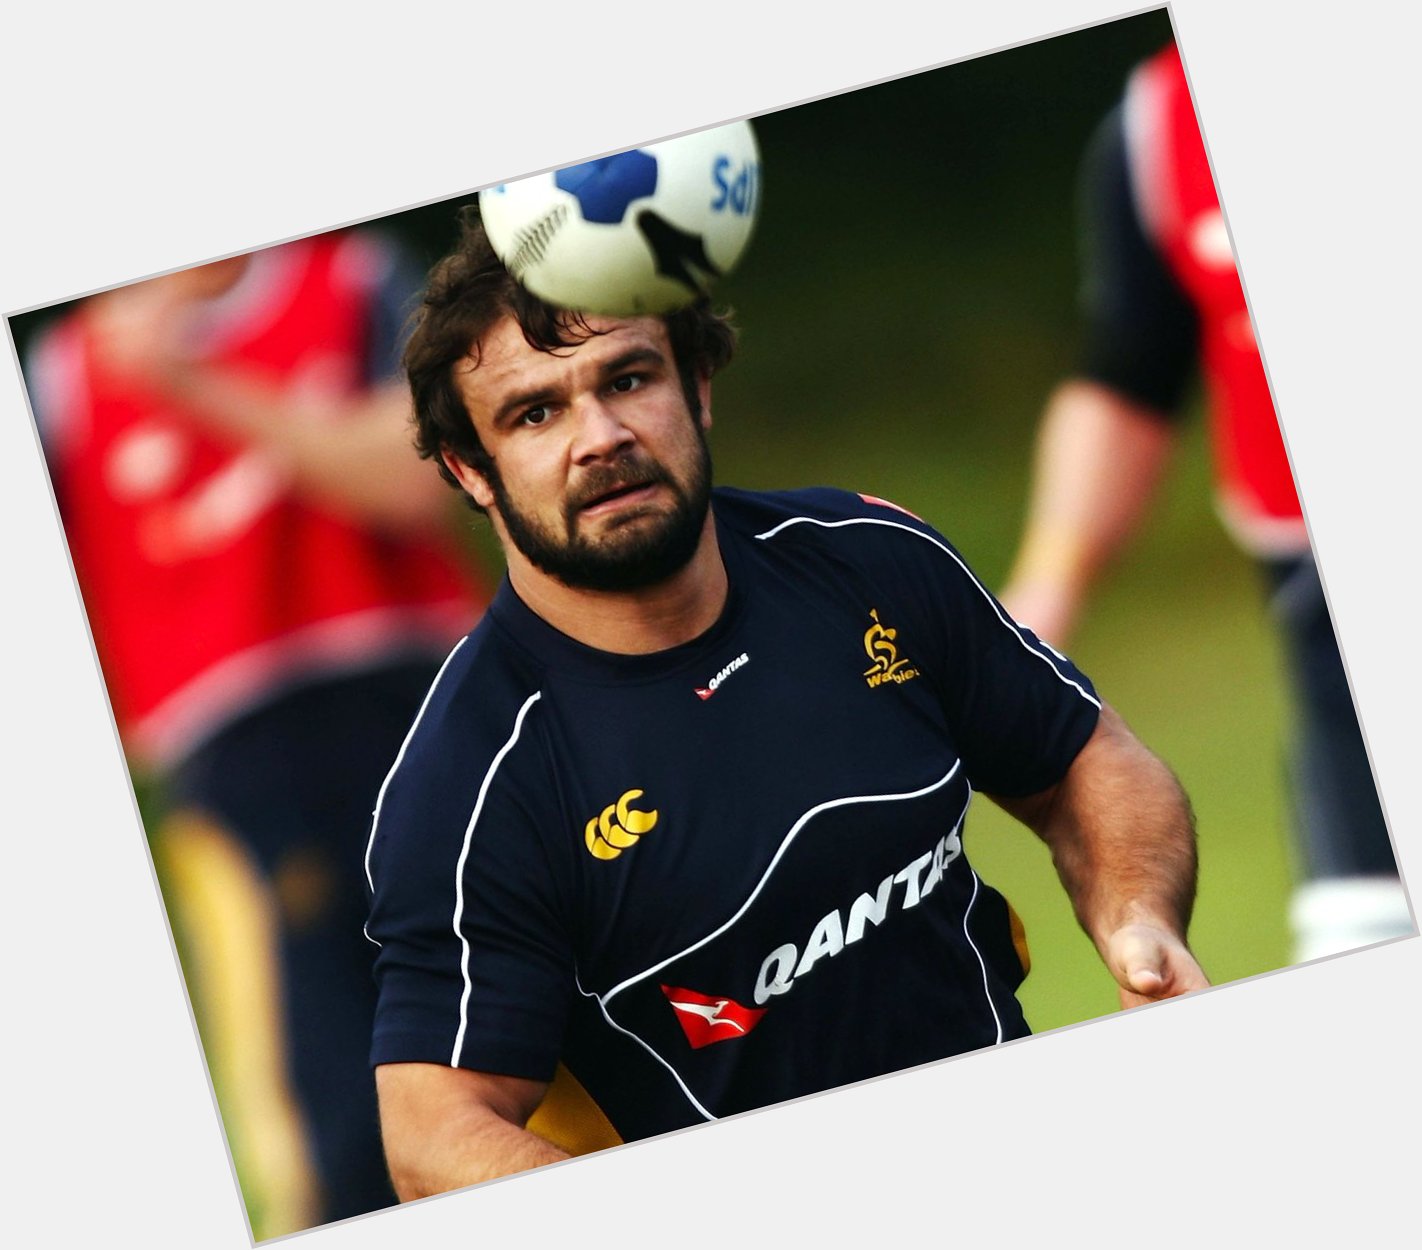 Happy birthday to Wallaby No. 779 who made his Test debut vs. Argentina in Buenos Aires (2002)! 